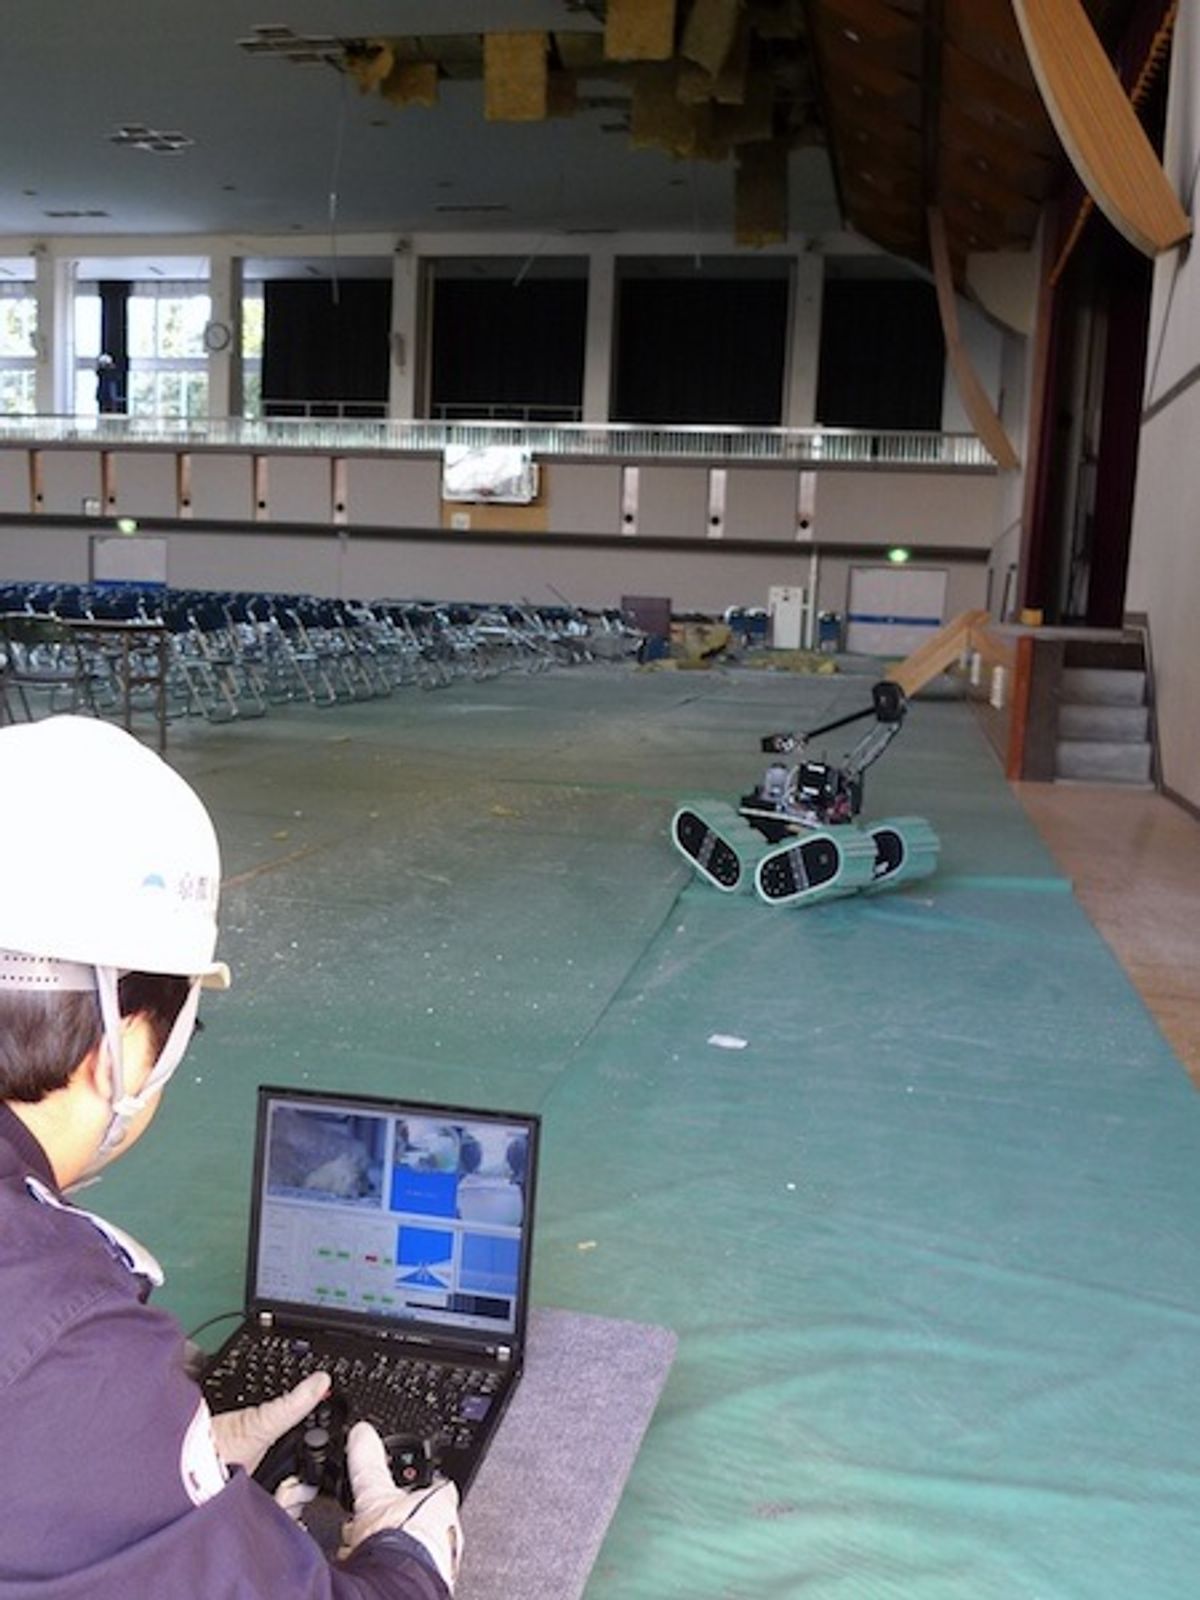 Japanese Robot Surveys Damaged Gymnasium Too Dangerous for Rescue Workers